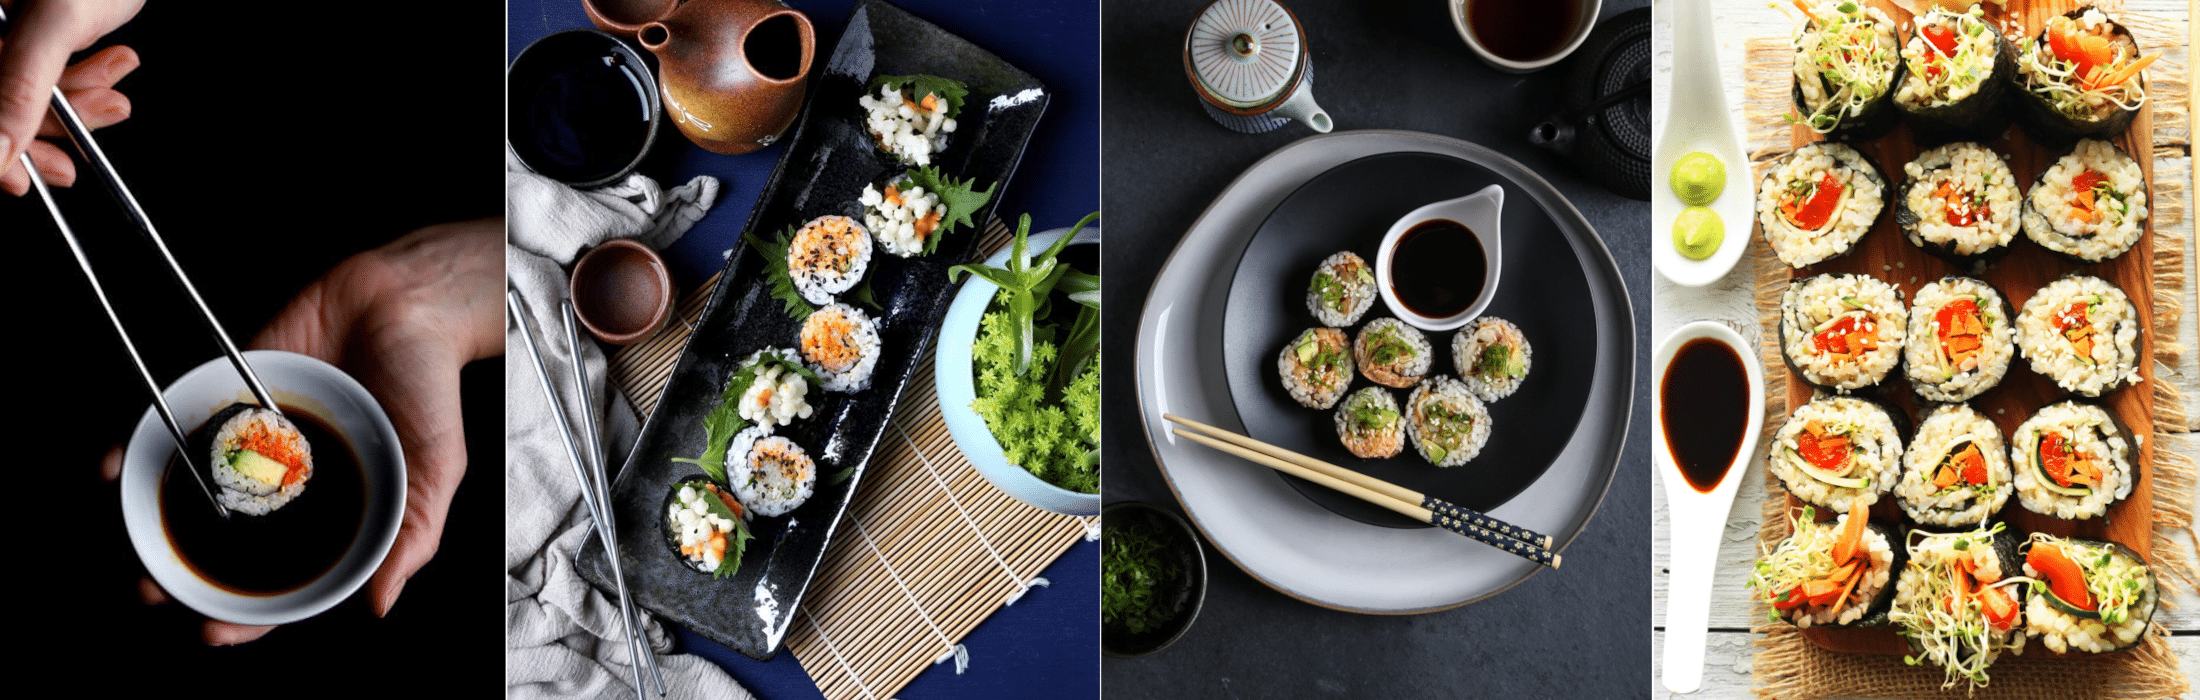 Spectacular sushi maki mat For Delicious Meals 